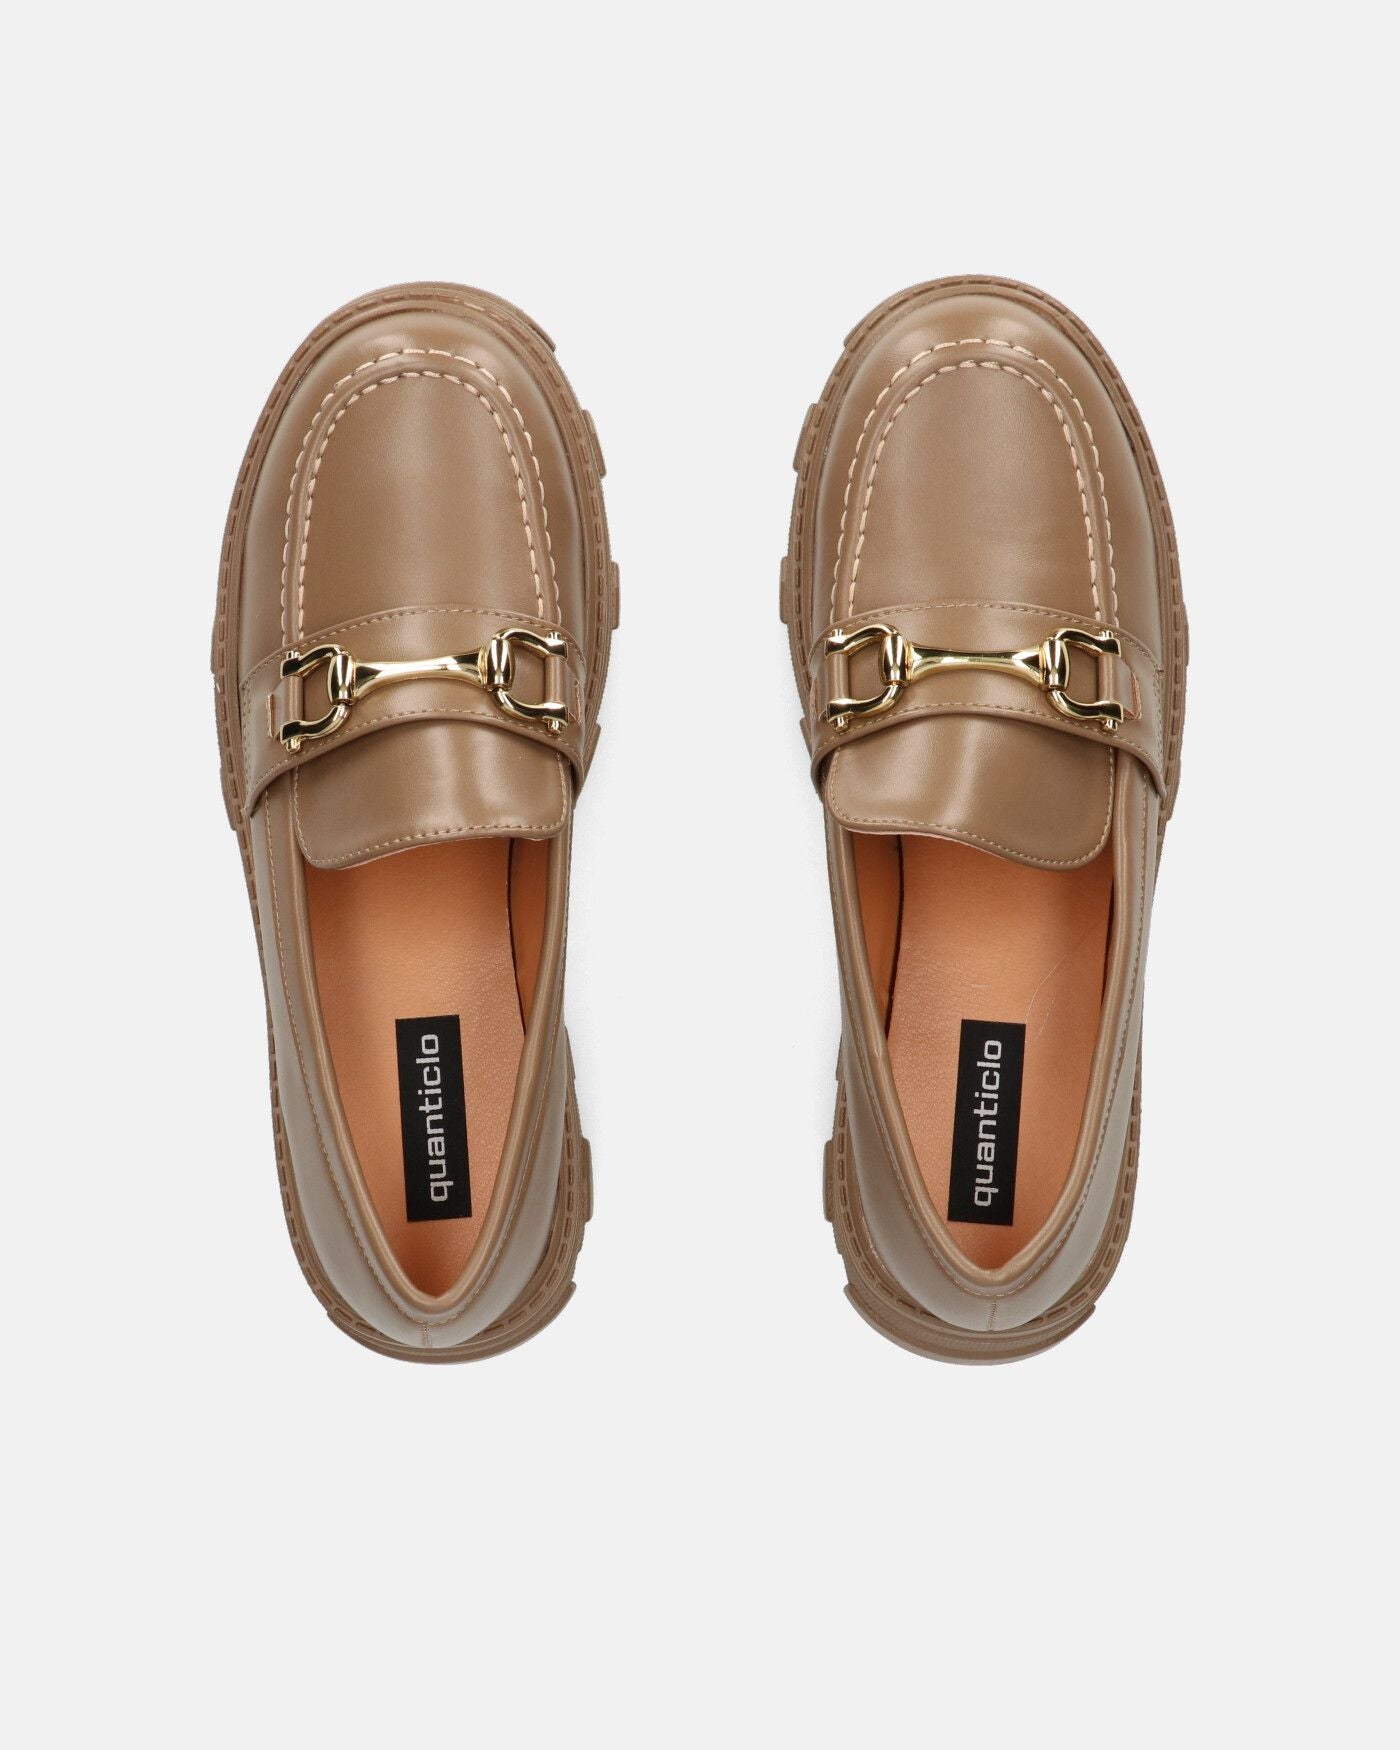 JOCASTA - brown flat shoes with golden ornament